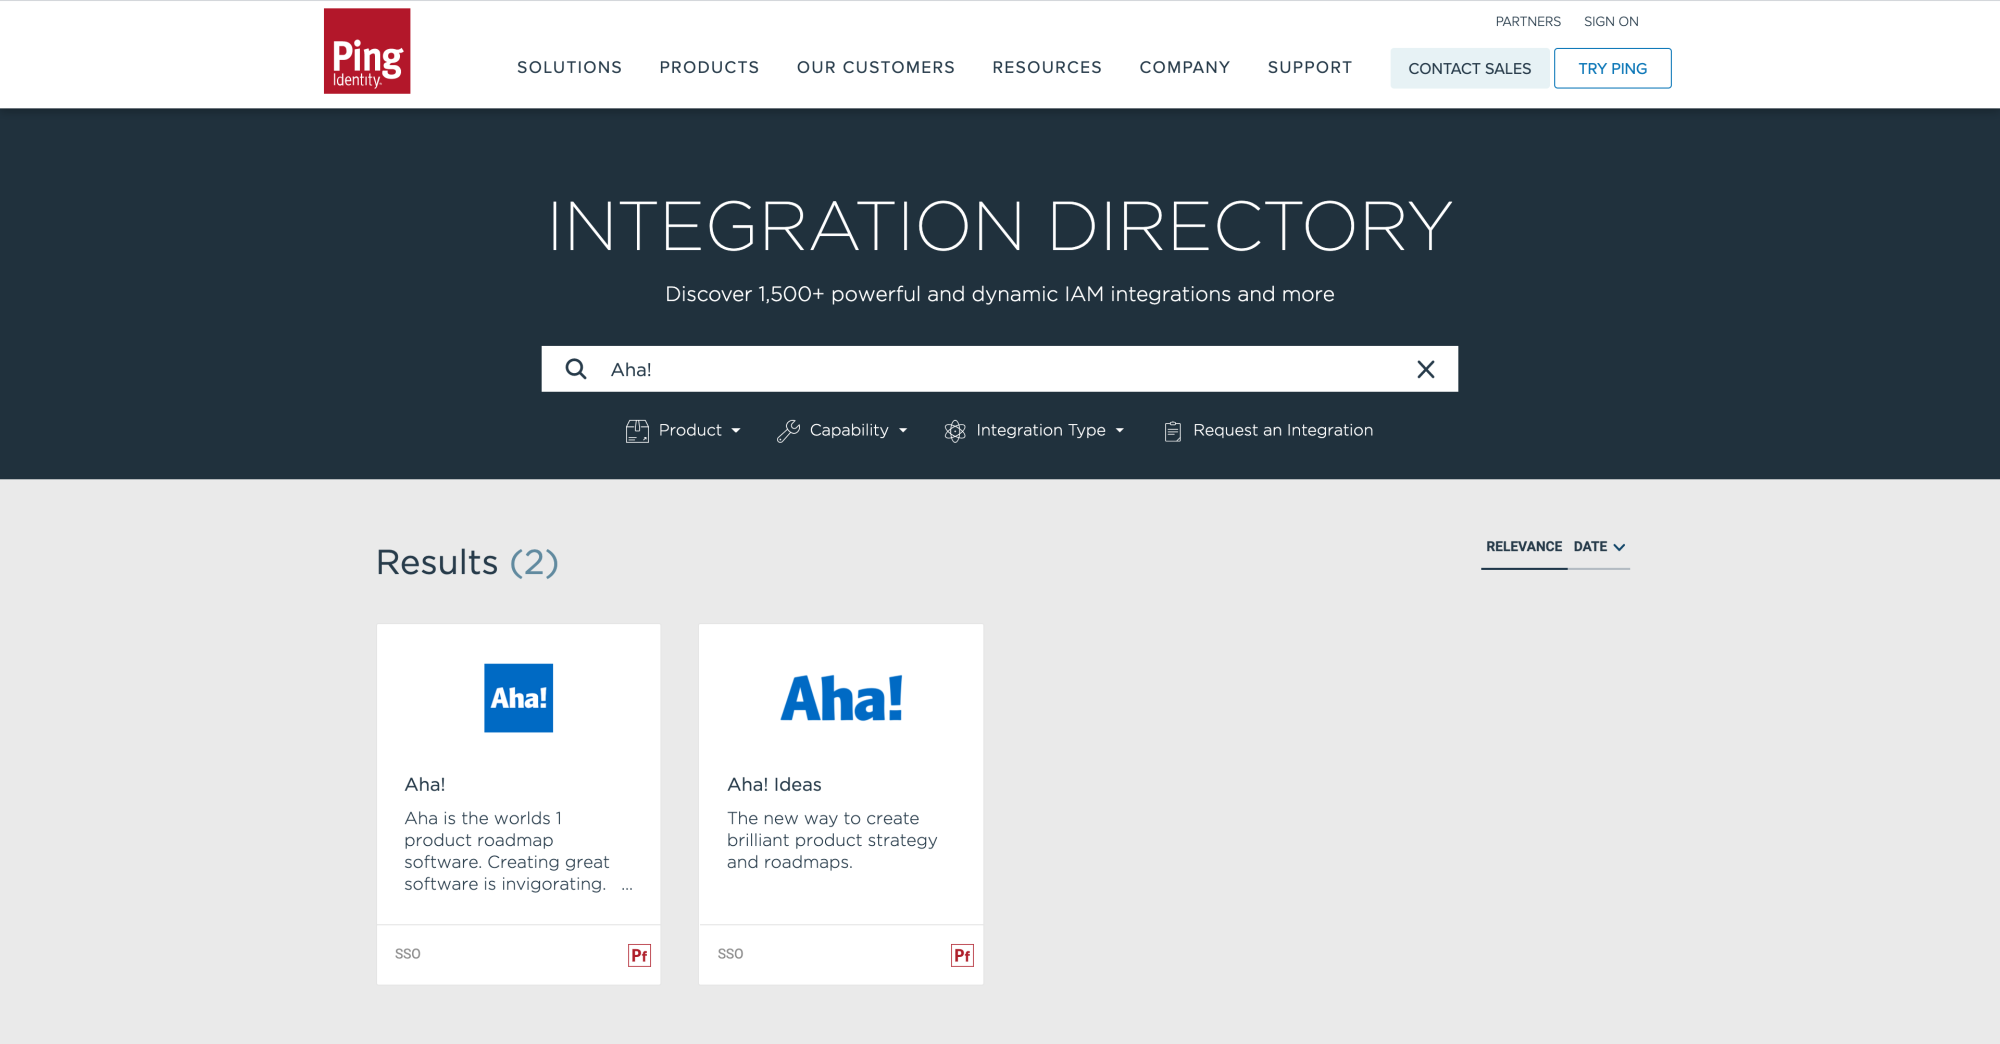 Find the Aha! integrations in the Ping Identity Integration Directory and configure the integration.